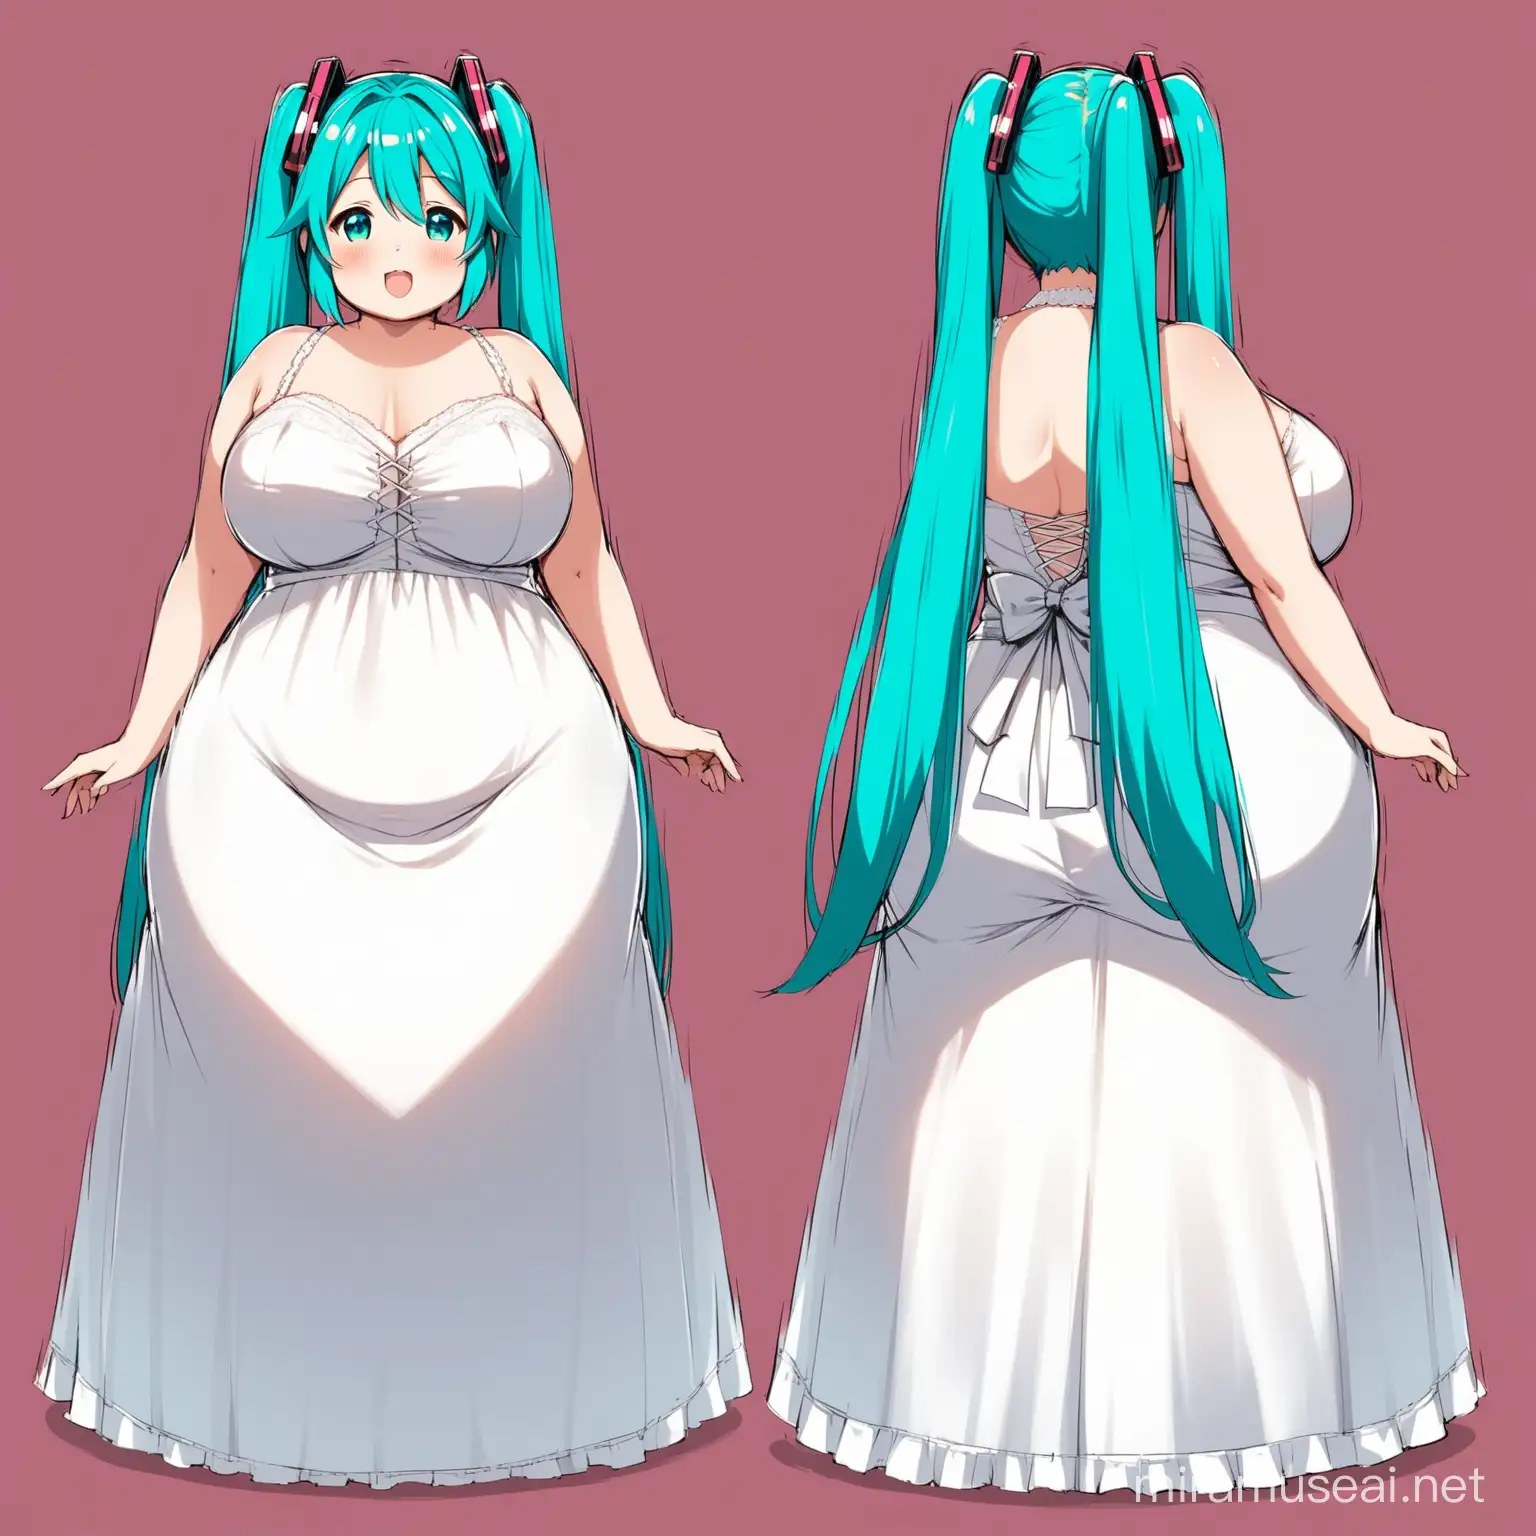 Fat and chubby Hatsune miku in a marriage dress (front, side, and back view) (100 steps)